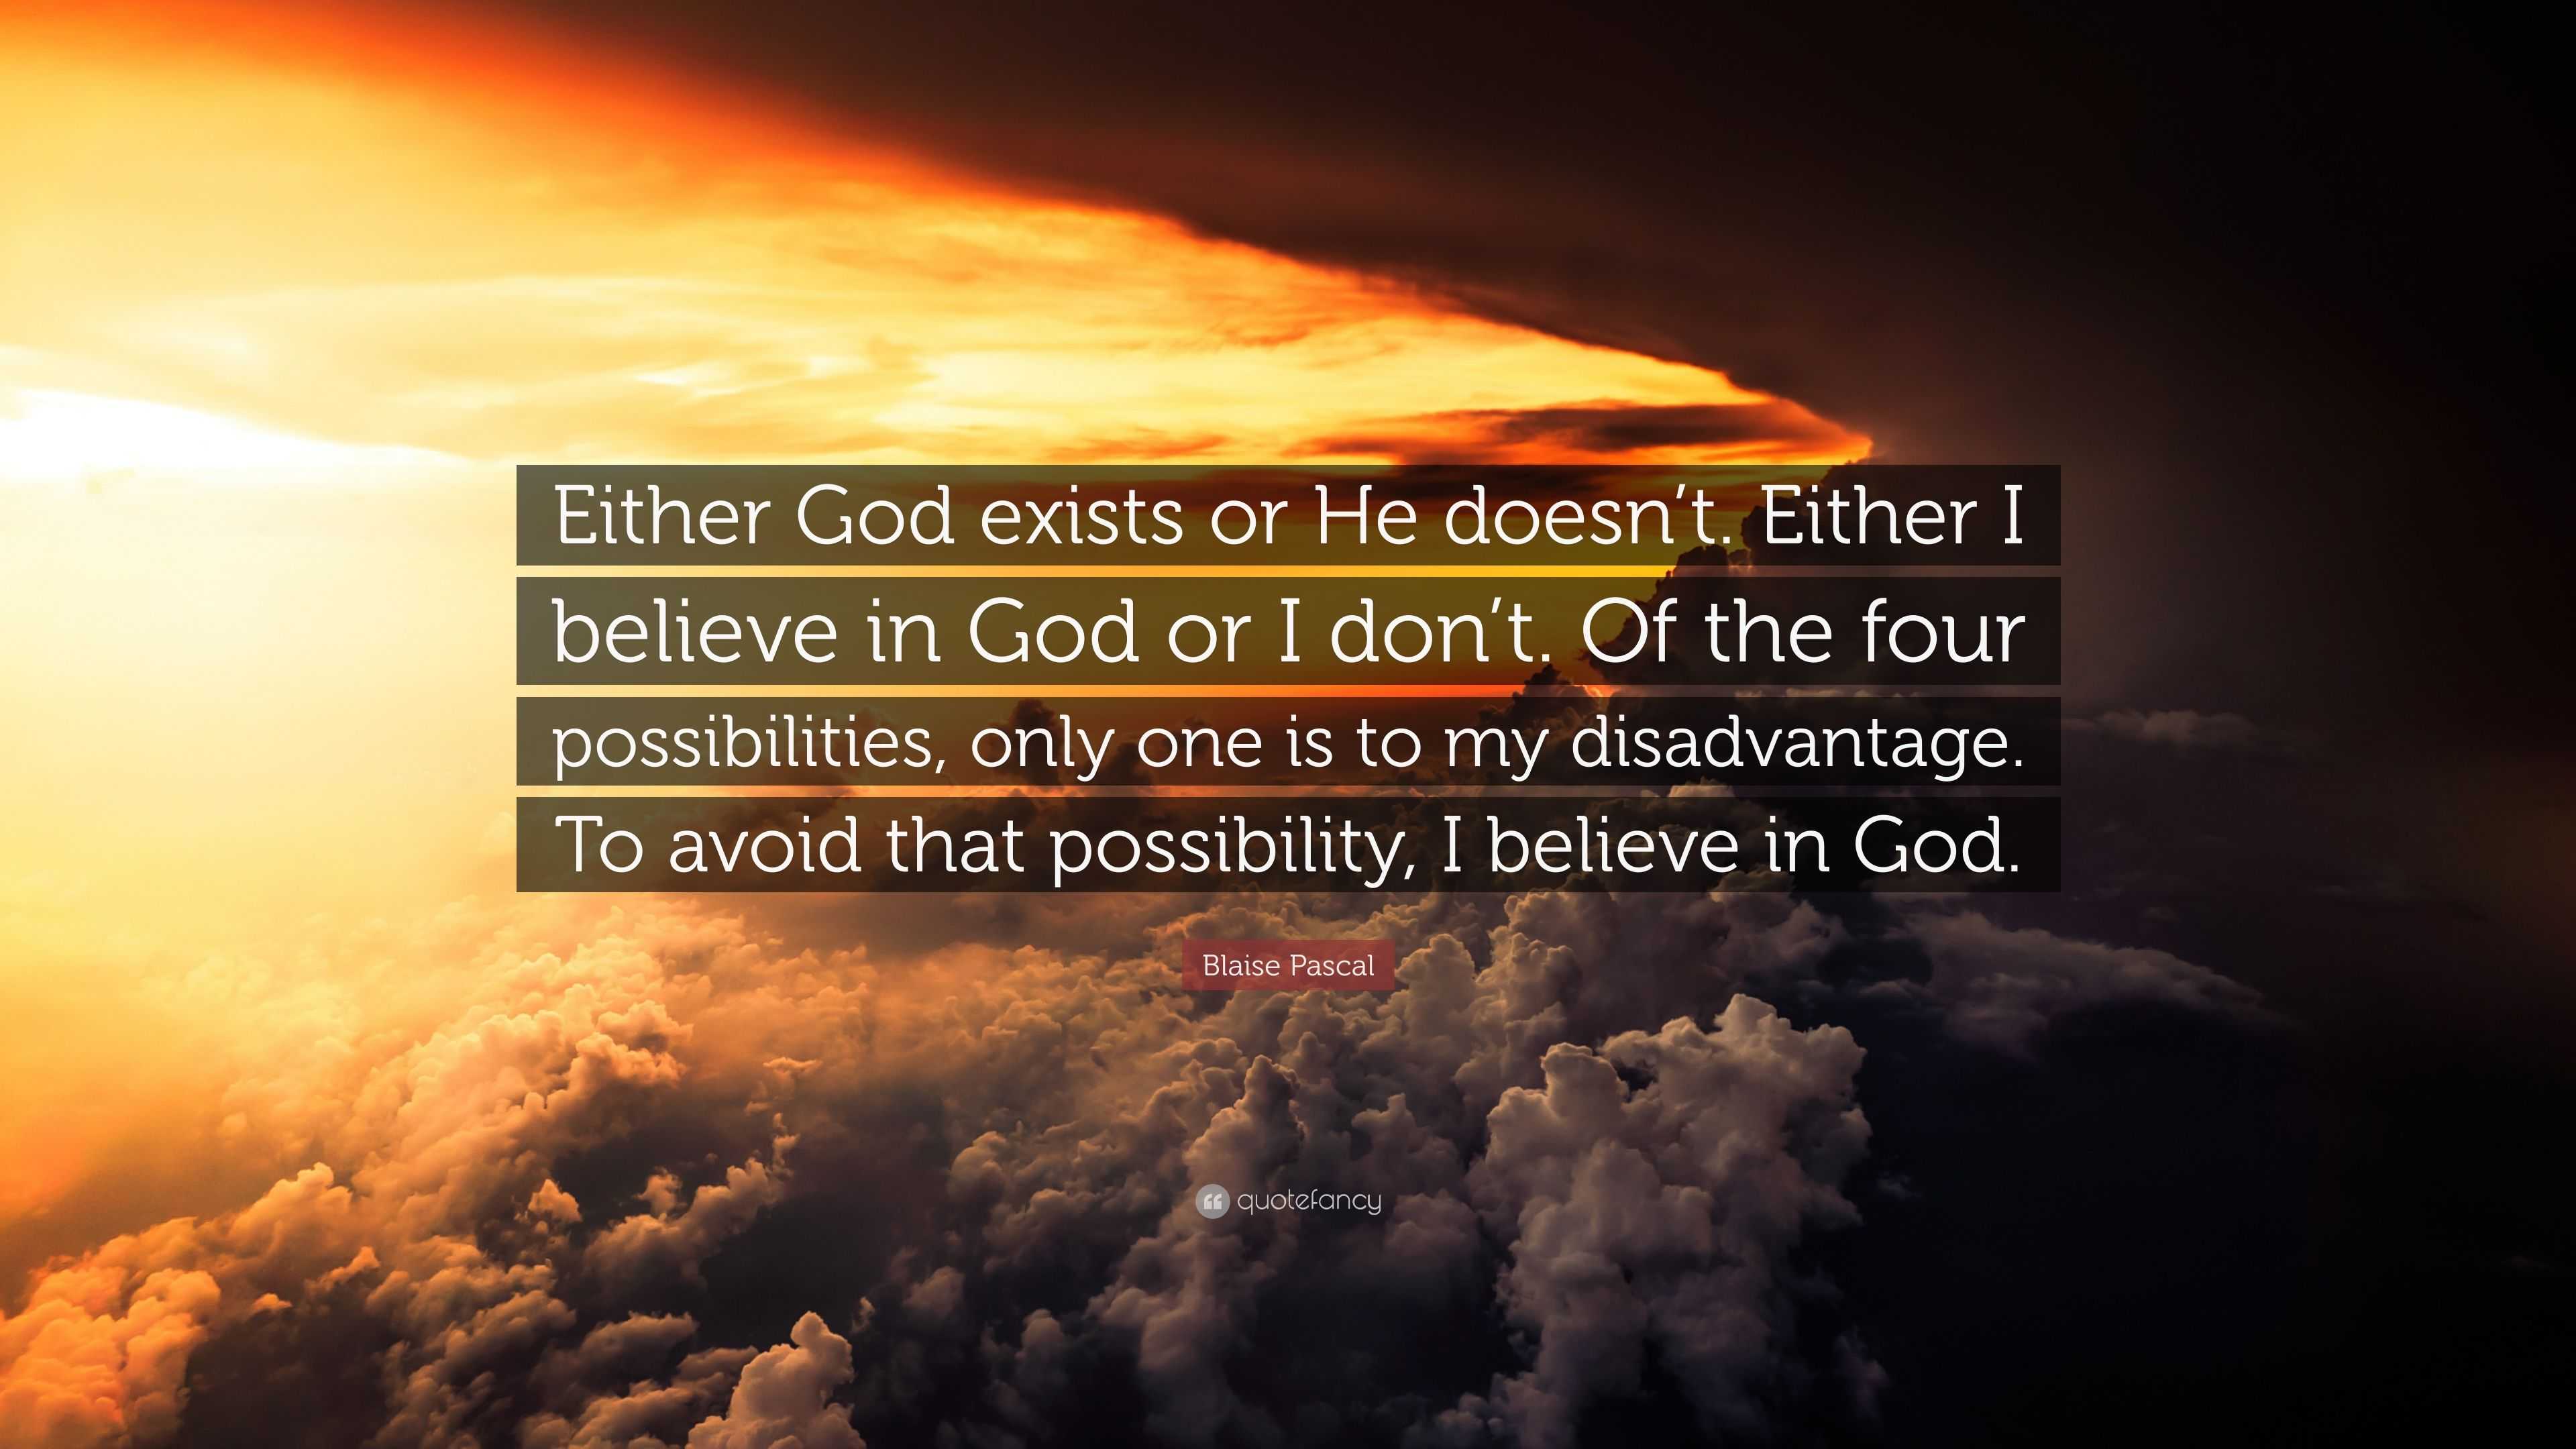 I Don't Believe in (that) God, Either